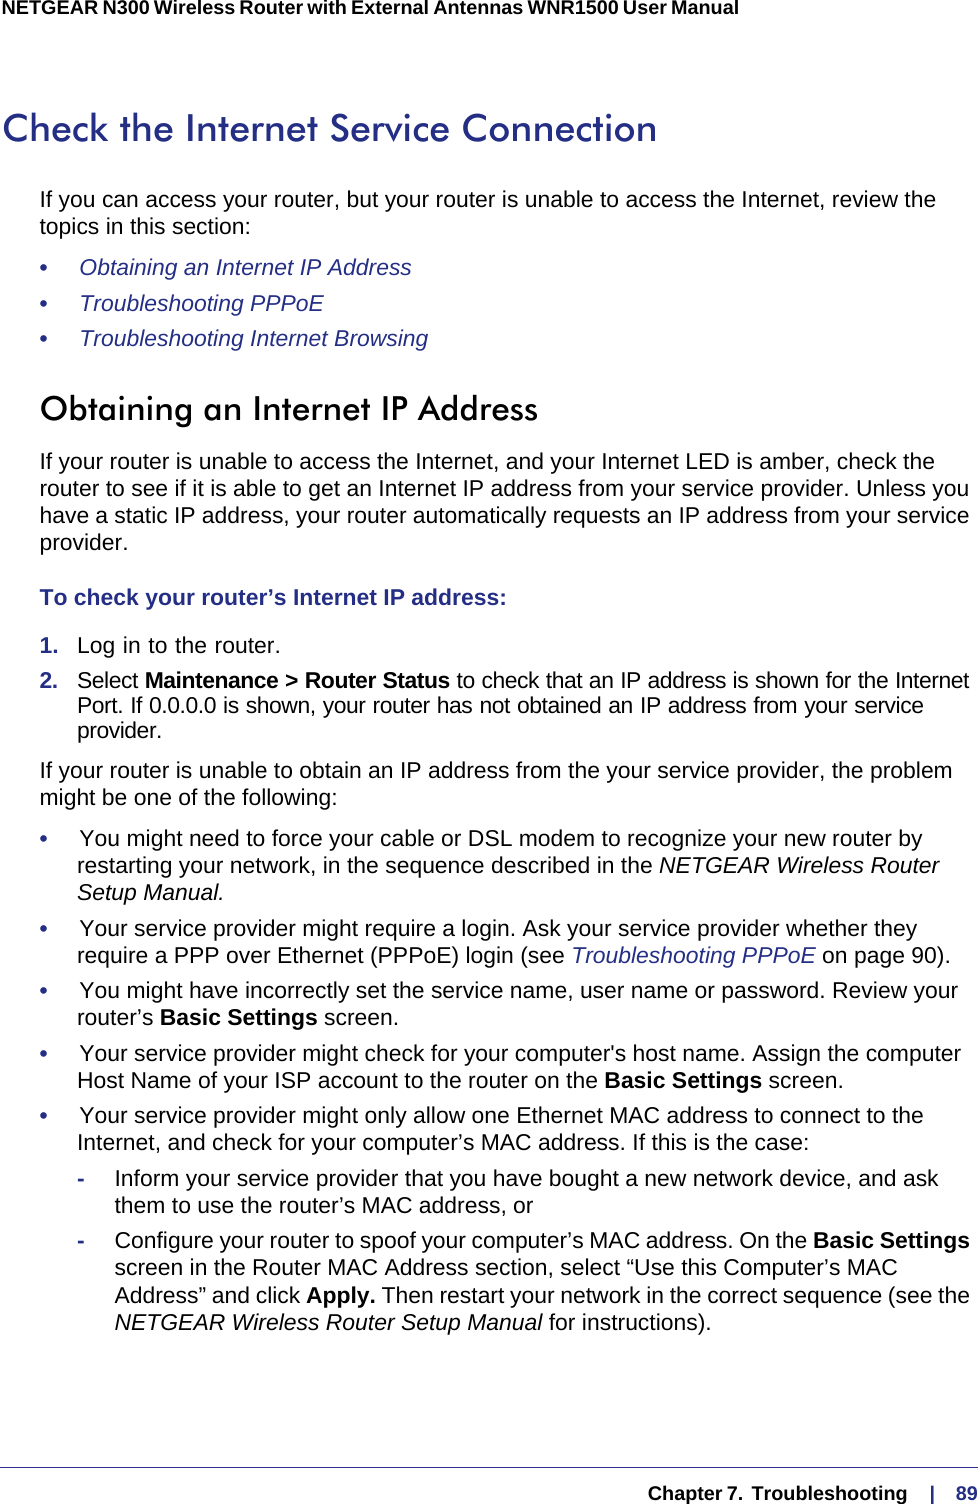   Chapter 7.  Troubleshooting     |    89NETGEAR N300 Wireless Router with External Antennas WNR1500 User Manual Check the Internet Service ConnectionIf you can access your router, but your router is unable to access the Internet, review the topics in this section: •     Obtaining an Internet IP Address •     Troubleshooting PPPoE •     Troubleshooting Internet Browsing Obtaining an Internet IP AddressIf your router is unable to access the Internet, and your Internet LED is amber, check the router to see if it is able to get an Internet IP address from your service provider. Unless you have a static IP address, your router automatically requests an IP address from your service provider. To check your router’s Internet IP address: 1.  Log in to the router.2.  Select Maintenance &gt; Router Status to check that an IP address is shown for the Internet Port. If 0.0.0.0 is shown, your router has not obtained an IP address from your service provider.If your router is unable to obtain an IP address from the your service provider, the problem might be one of the following:•     You might need to force your cable or DSL modem to recognize your new router by restarting your network, in the sequence described in the NETGEAR Wireless Router Setup Manual.•     Your service provider might require a login. Ask your service provider whether they require a PPP over Ethernet (PPPoE) login (see Troubleshooting PPPoE on page  90).•     You might have incorrectly set the service name, user name or password. Review your router’s Basic Settings screen.•     Your service provider might check for your computer&apos;s host name. Assign the computer Host Name of your ISP account to the router on the Basic Settings screen.•     Your service provider might only allow one Ethernet MAC address to connect to the Internet, and check for your computer’s MAC address. If this is the case:-Inform your service provider that you have bought a new network device, and ask them to use the router’s MAC address, or -Configure your router to spoof your computer’s MAC address. On the Basic Settings screen in the Router MAC Address section, select “Use this Computer’s MAC Address” and click Apply. Then restart your network in the correct sequence (see the NETGEAR Wireless Router Setup Manual for instructions).